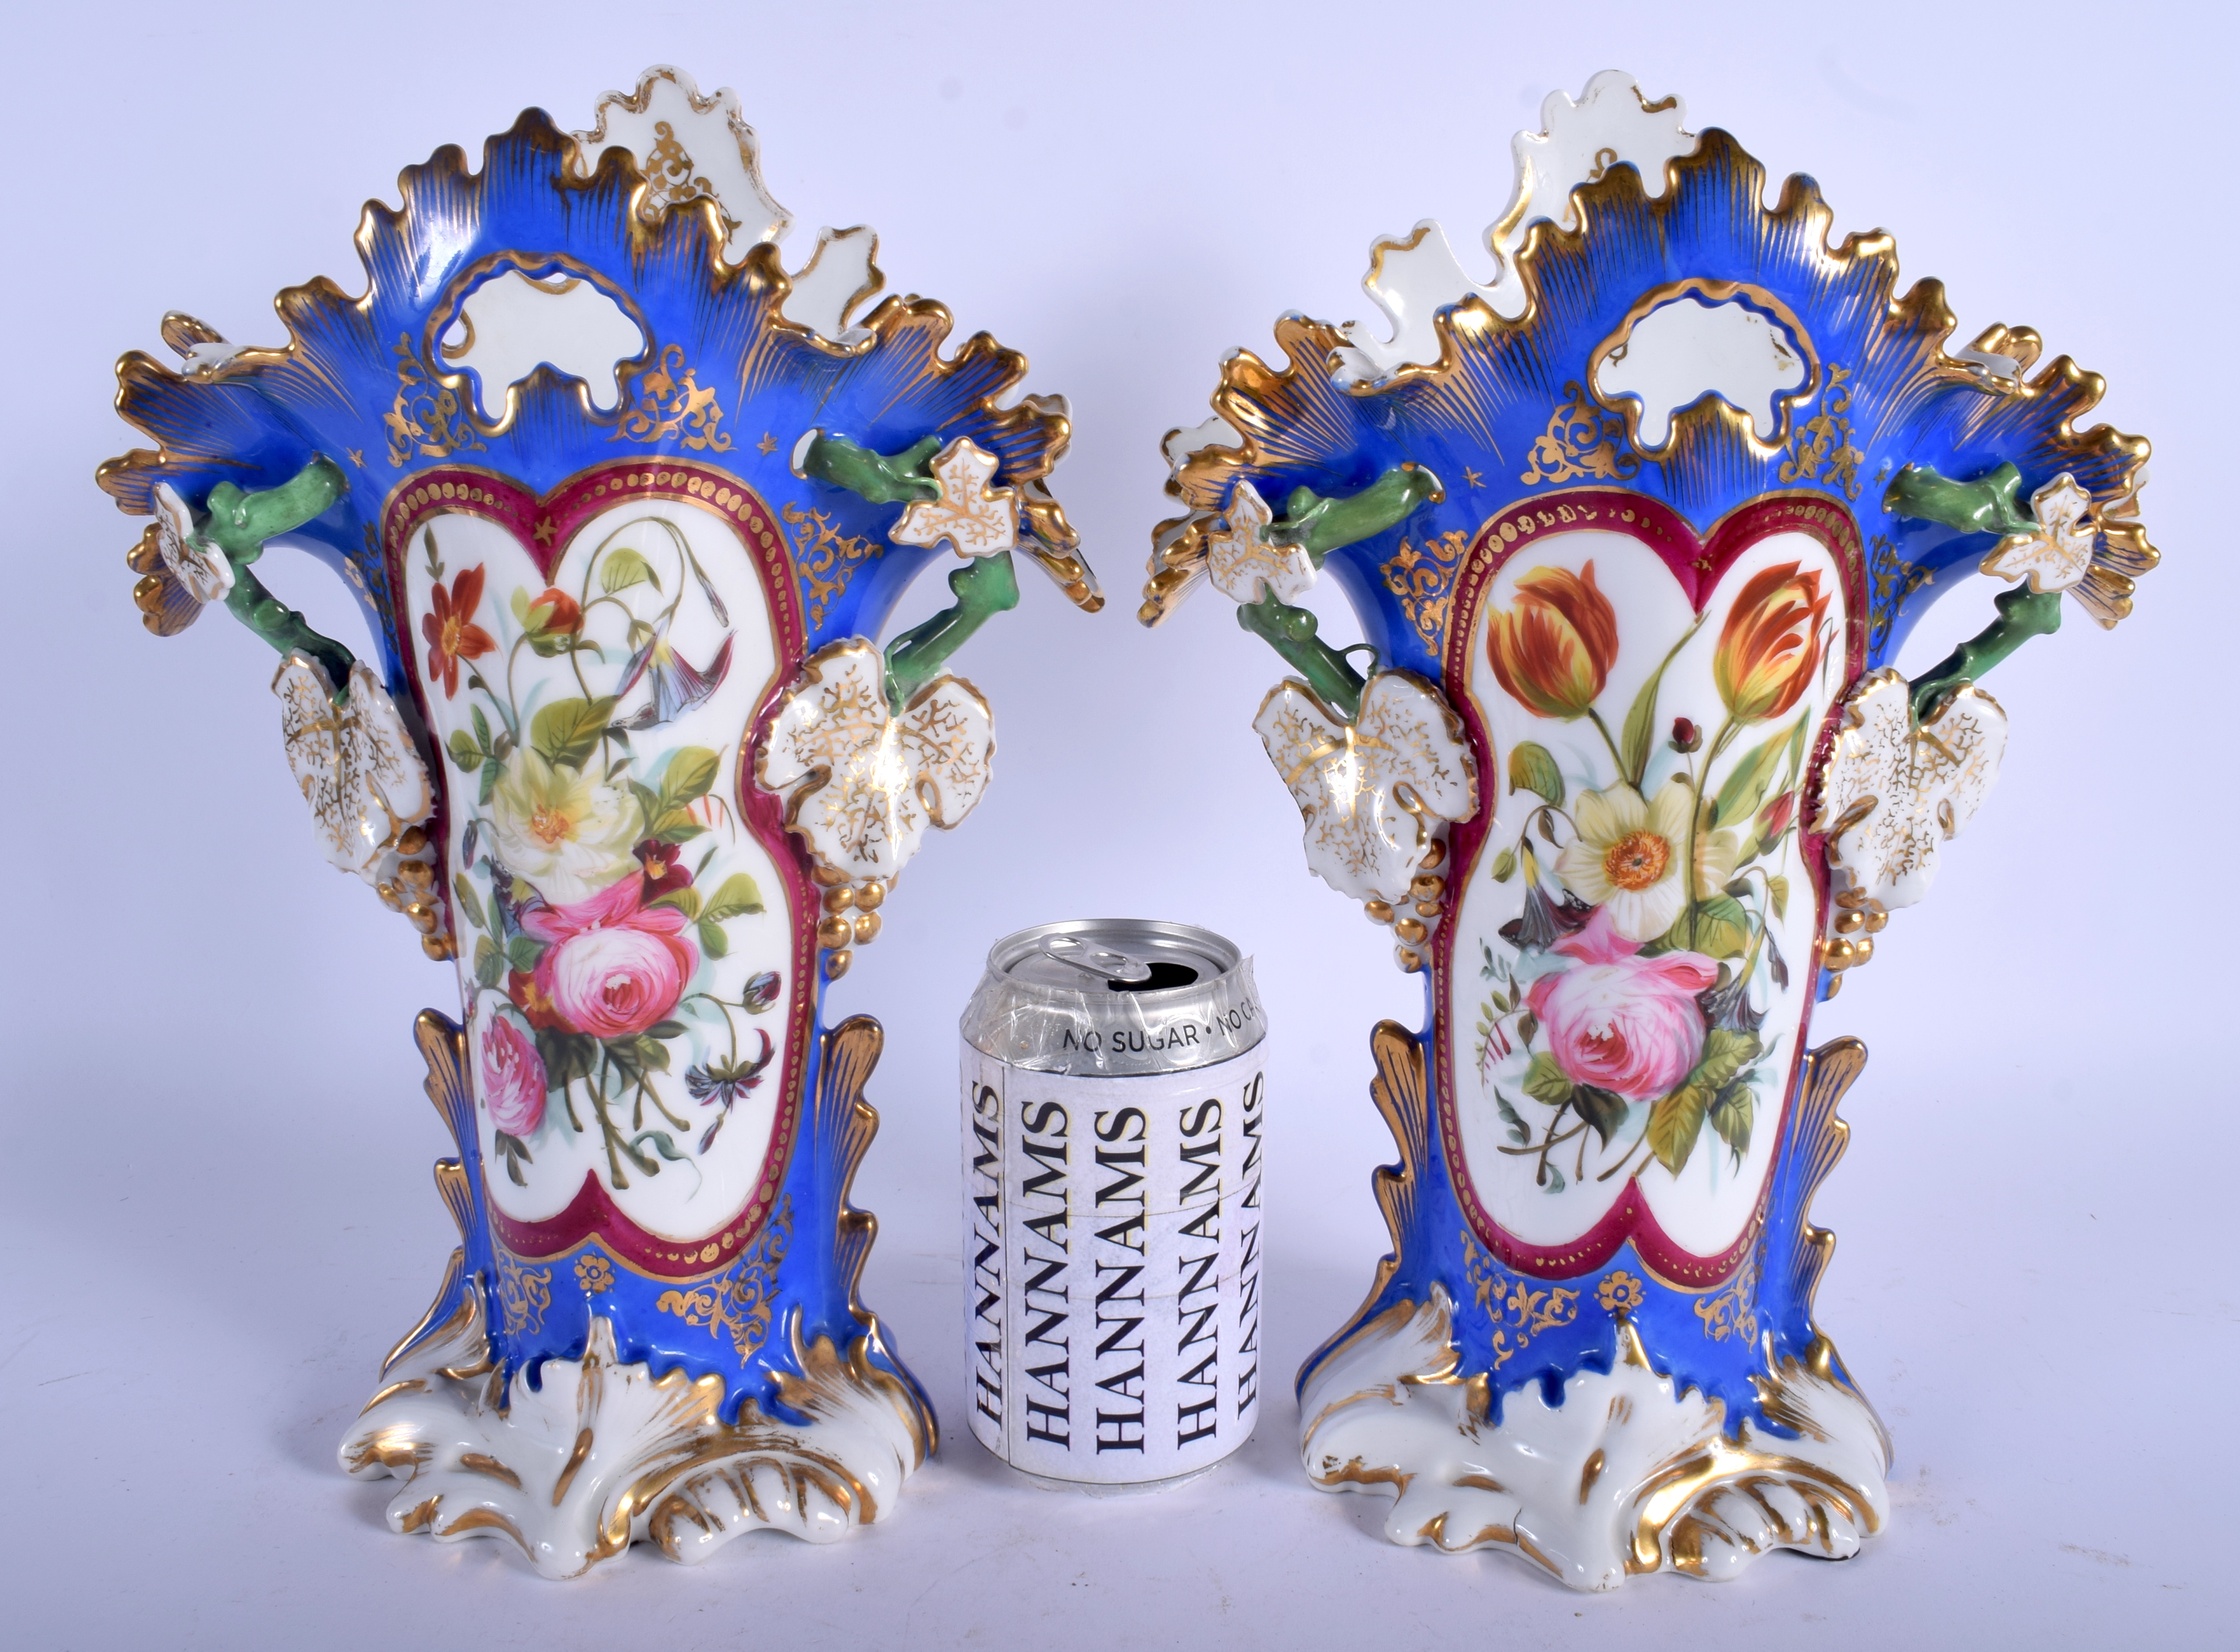 A LARGE PAIR OF 19TH CENTURY FRENCH PARIS PORCELAIN VASES painted with flowers. 34 cm x 16 cm.